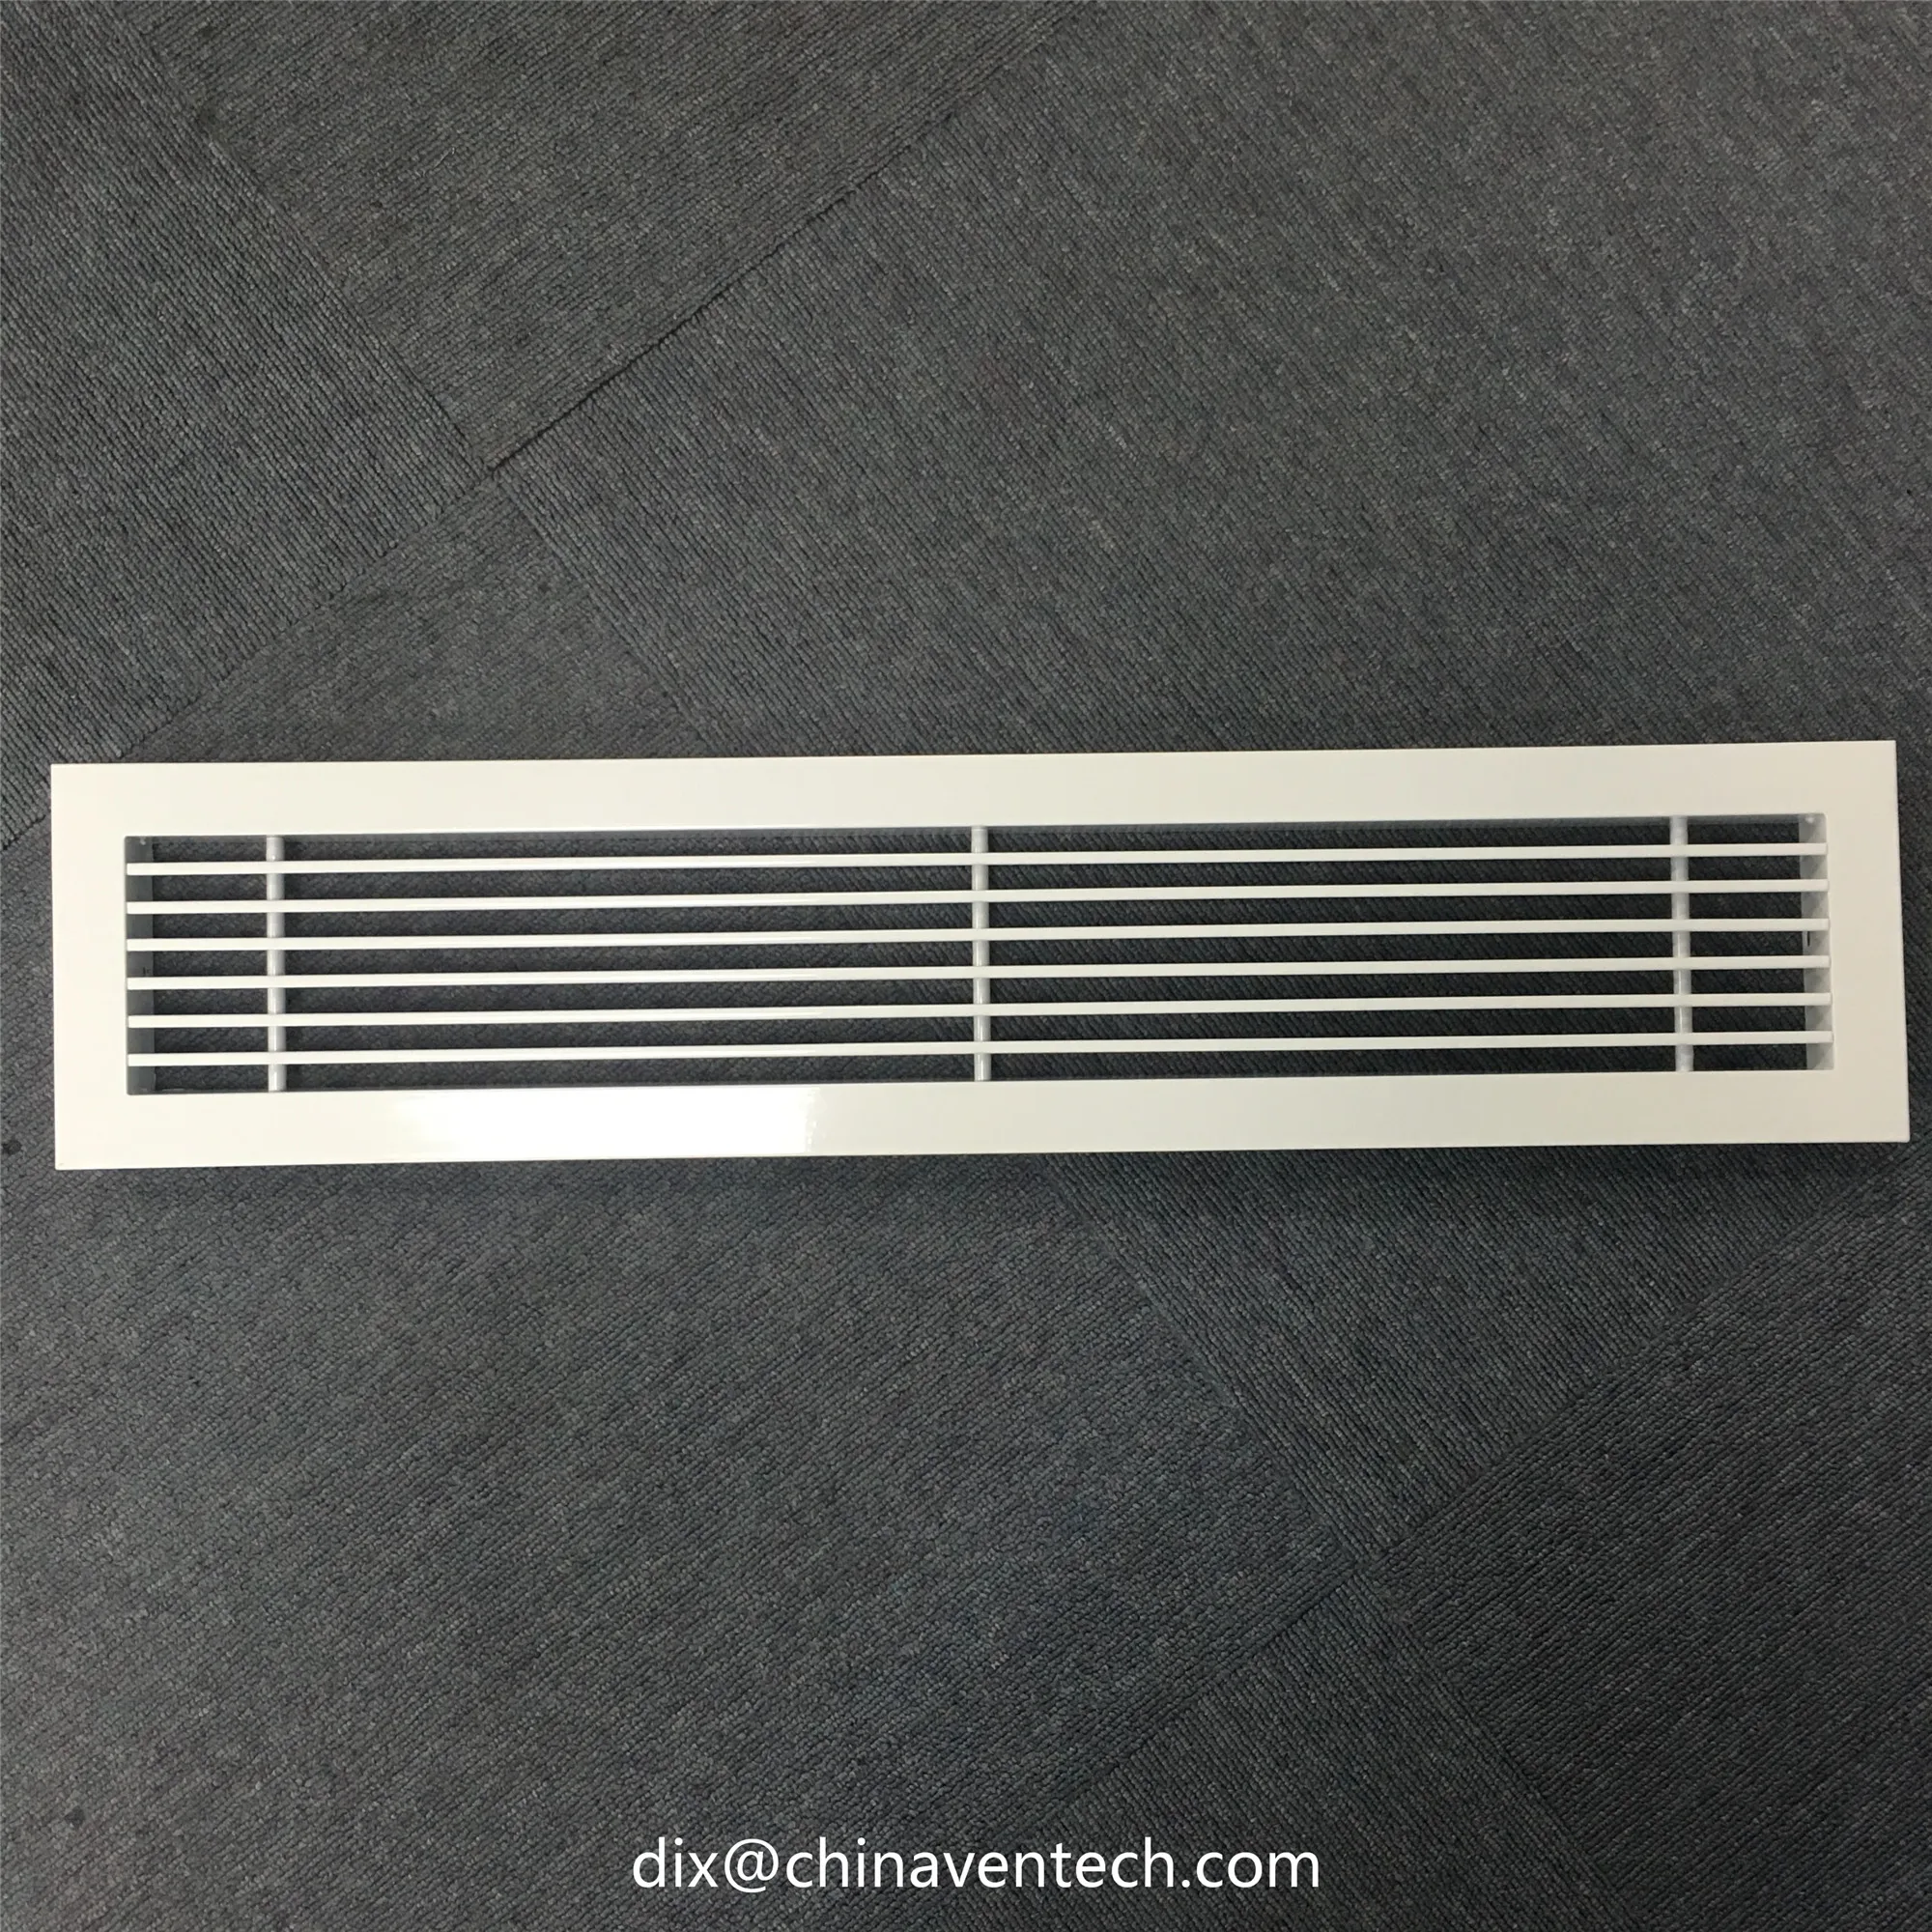 Hvac air ducting removable core linear bar grille